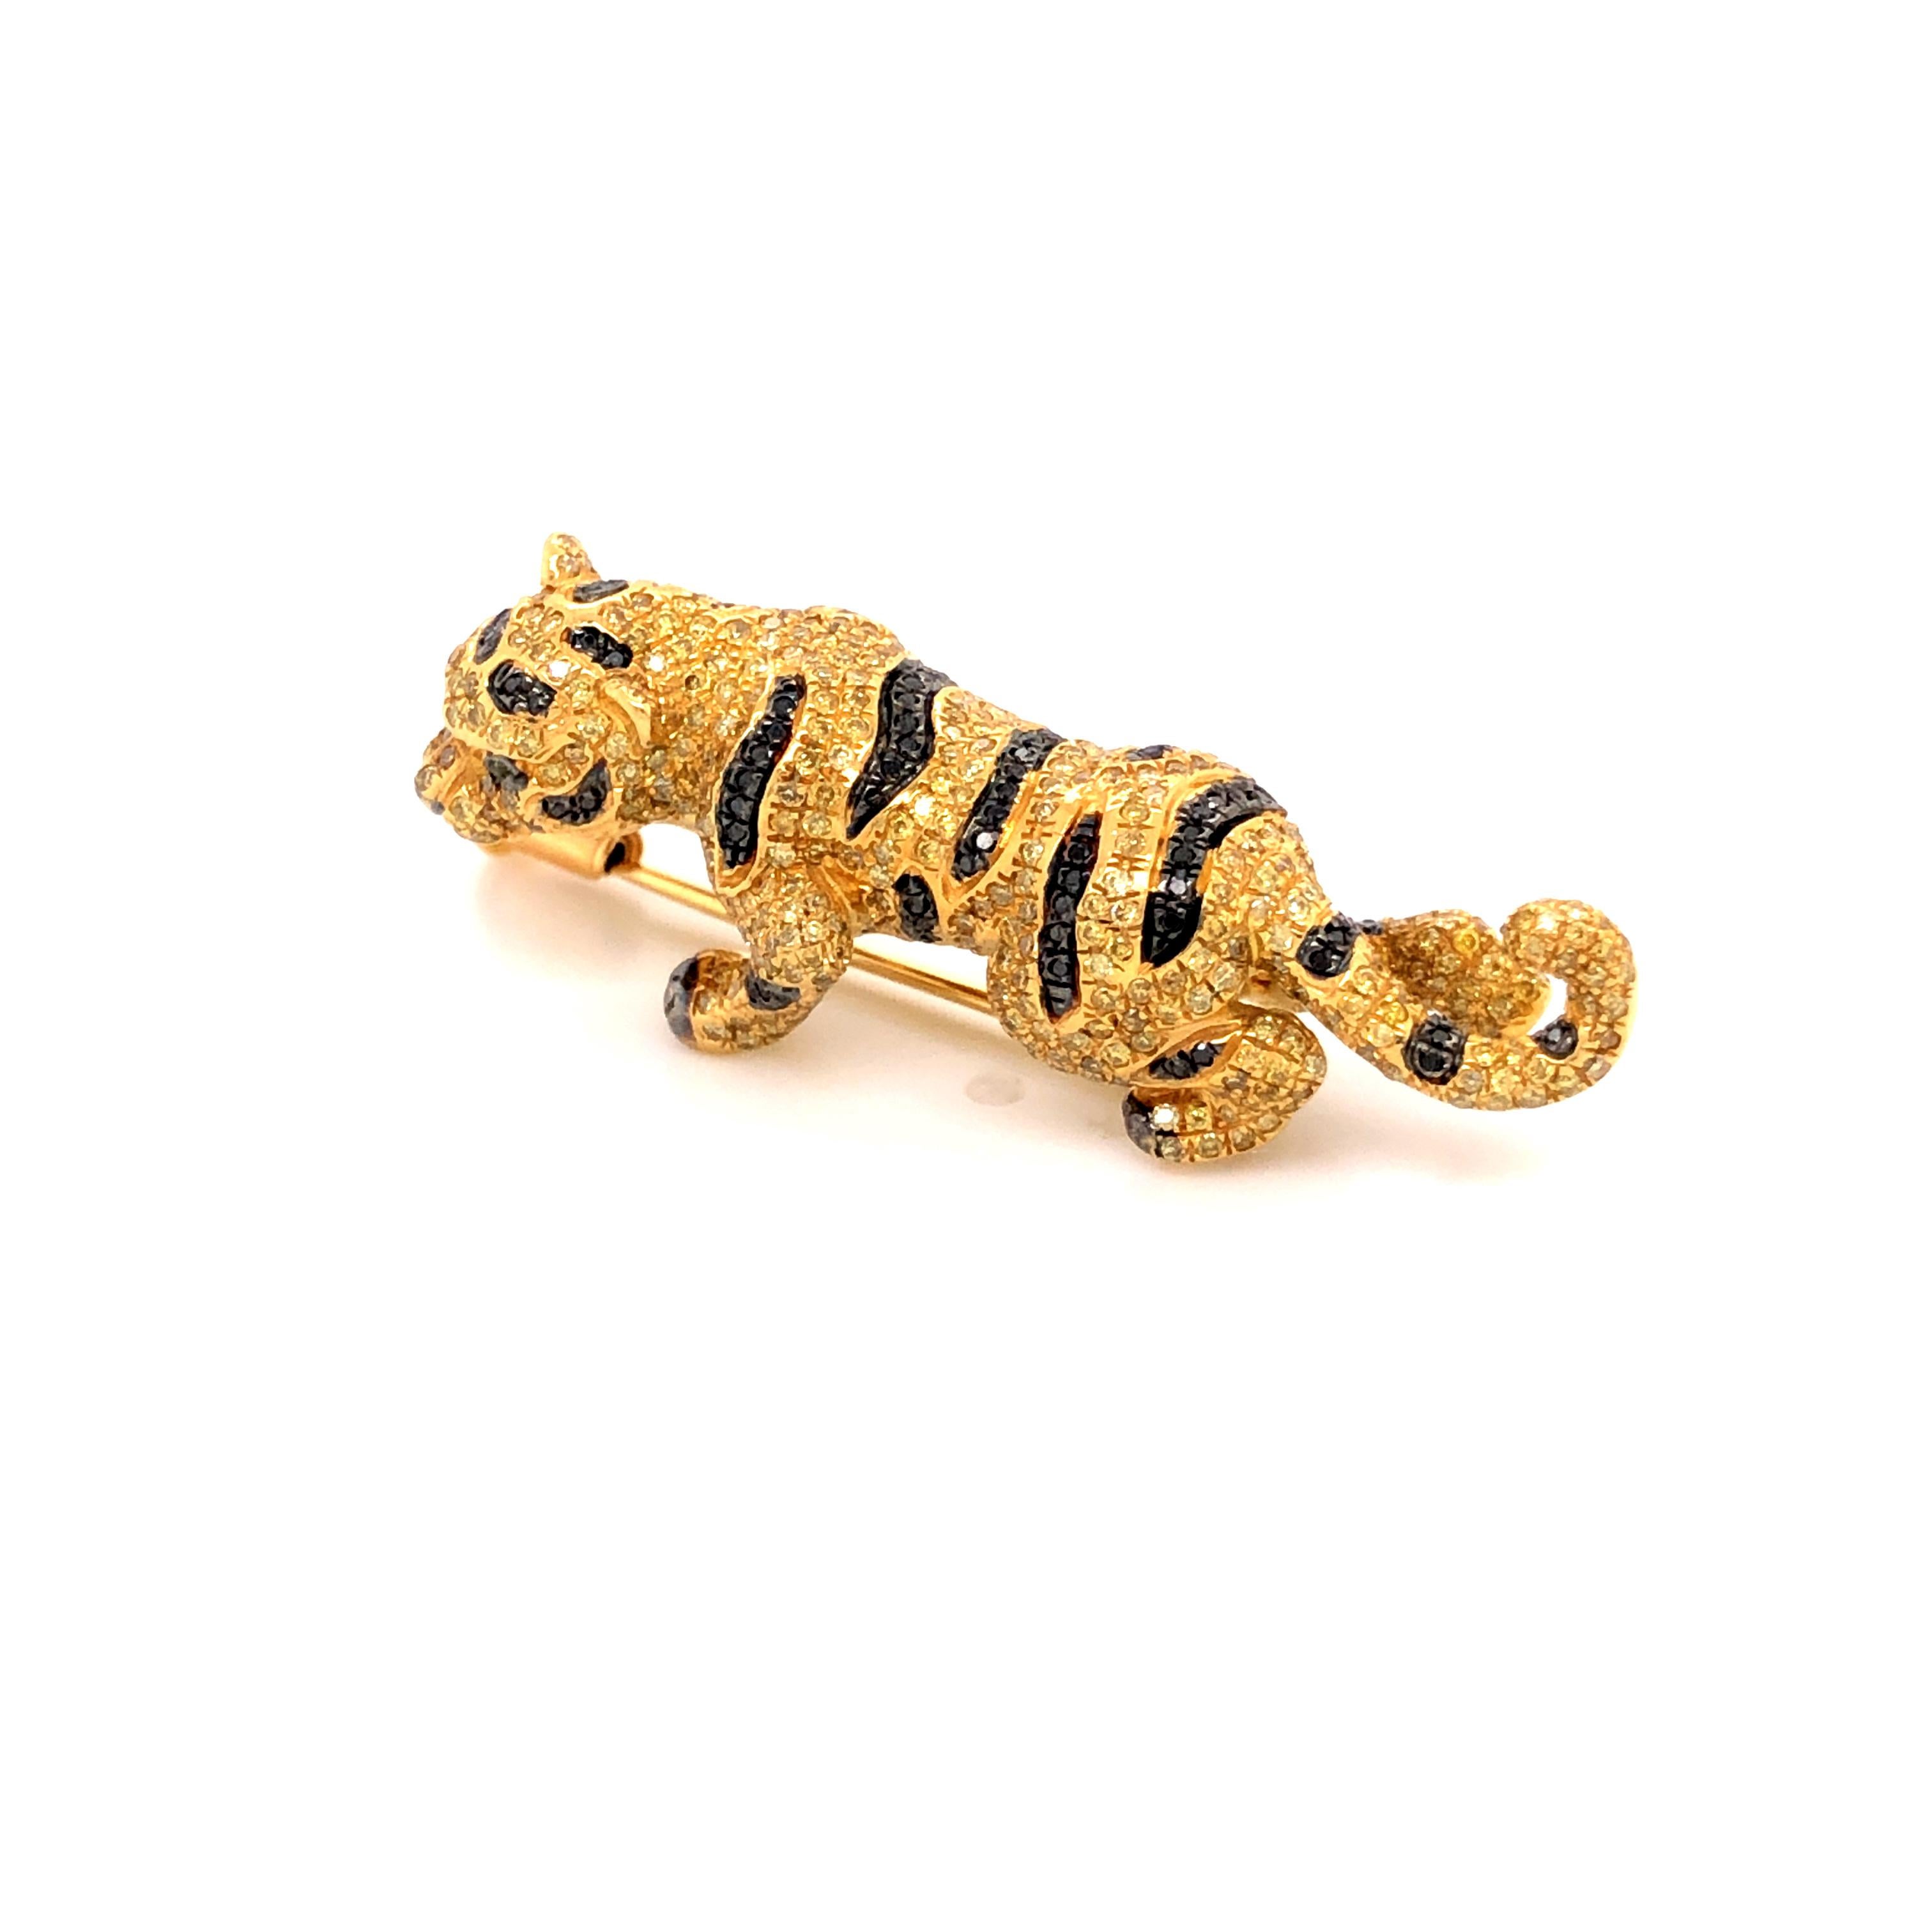 Round Cut Black Diamonds and Fancy Coloured Diamonds Leaping Tigress Brooch For Sale